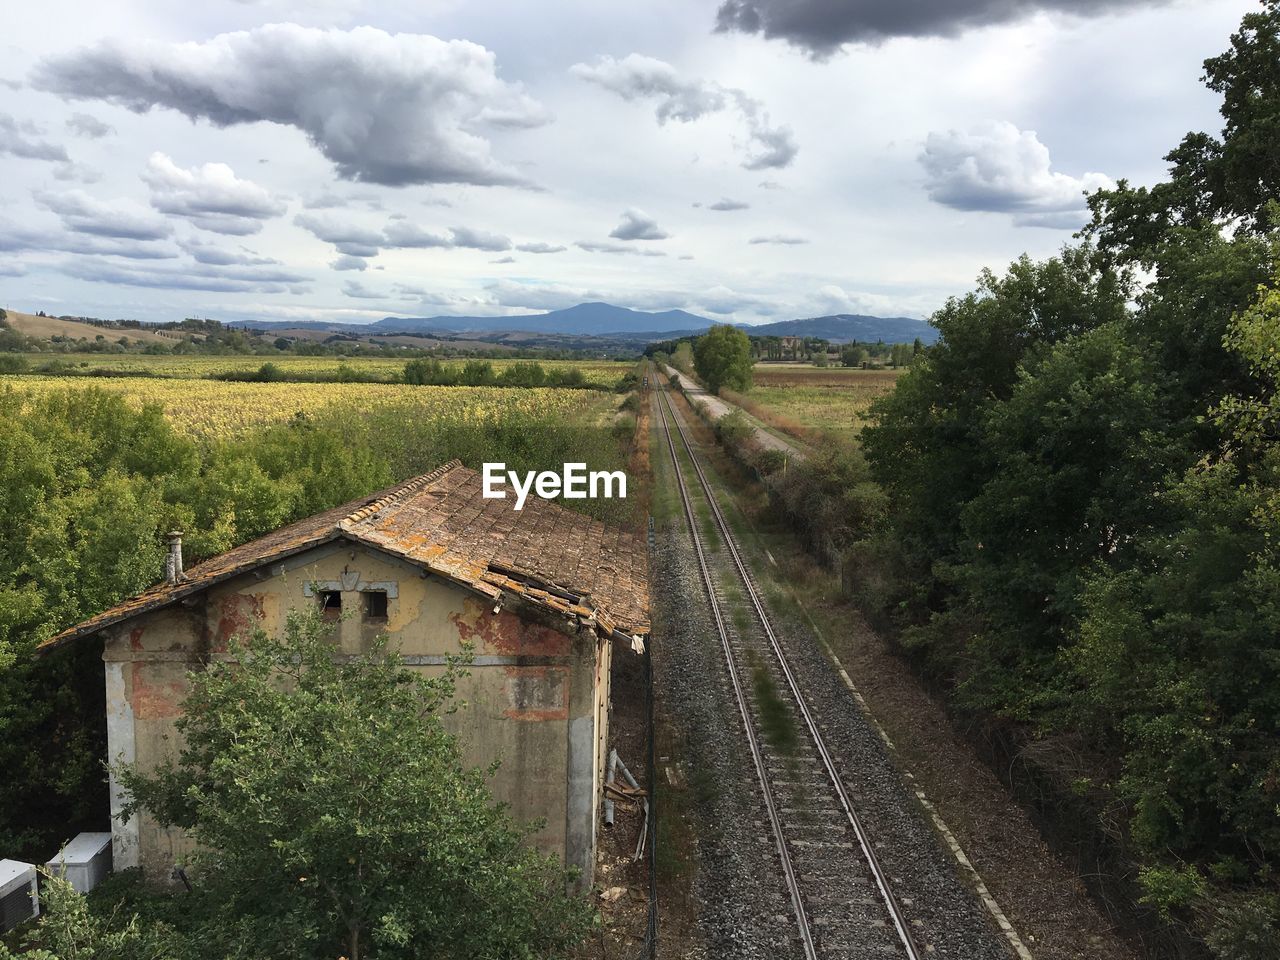 VIEW OF RAILROAD TRACK AGAINST SKY